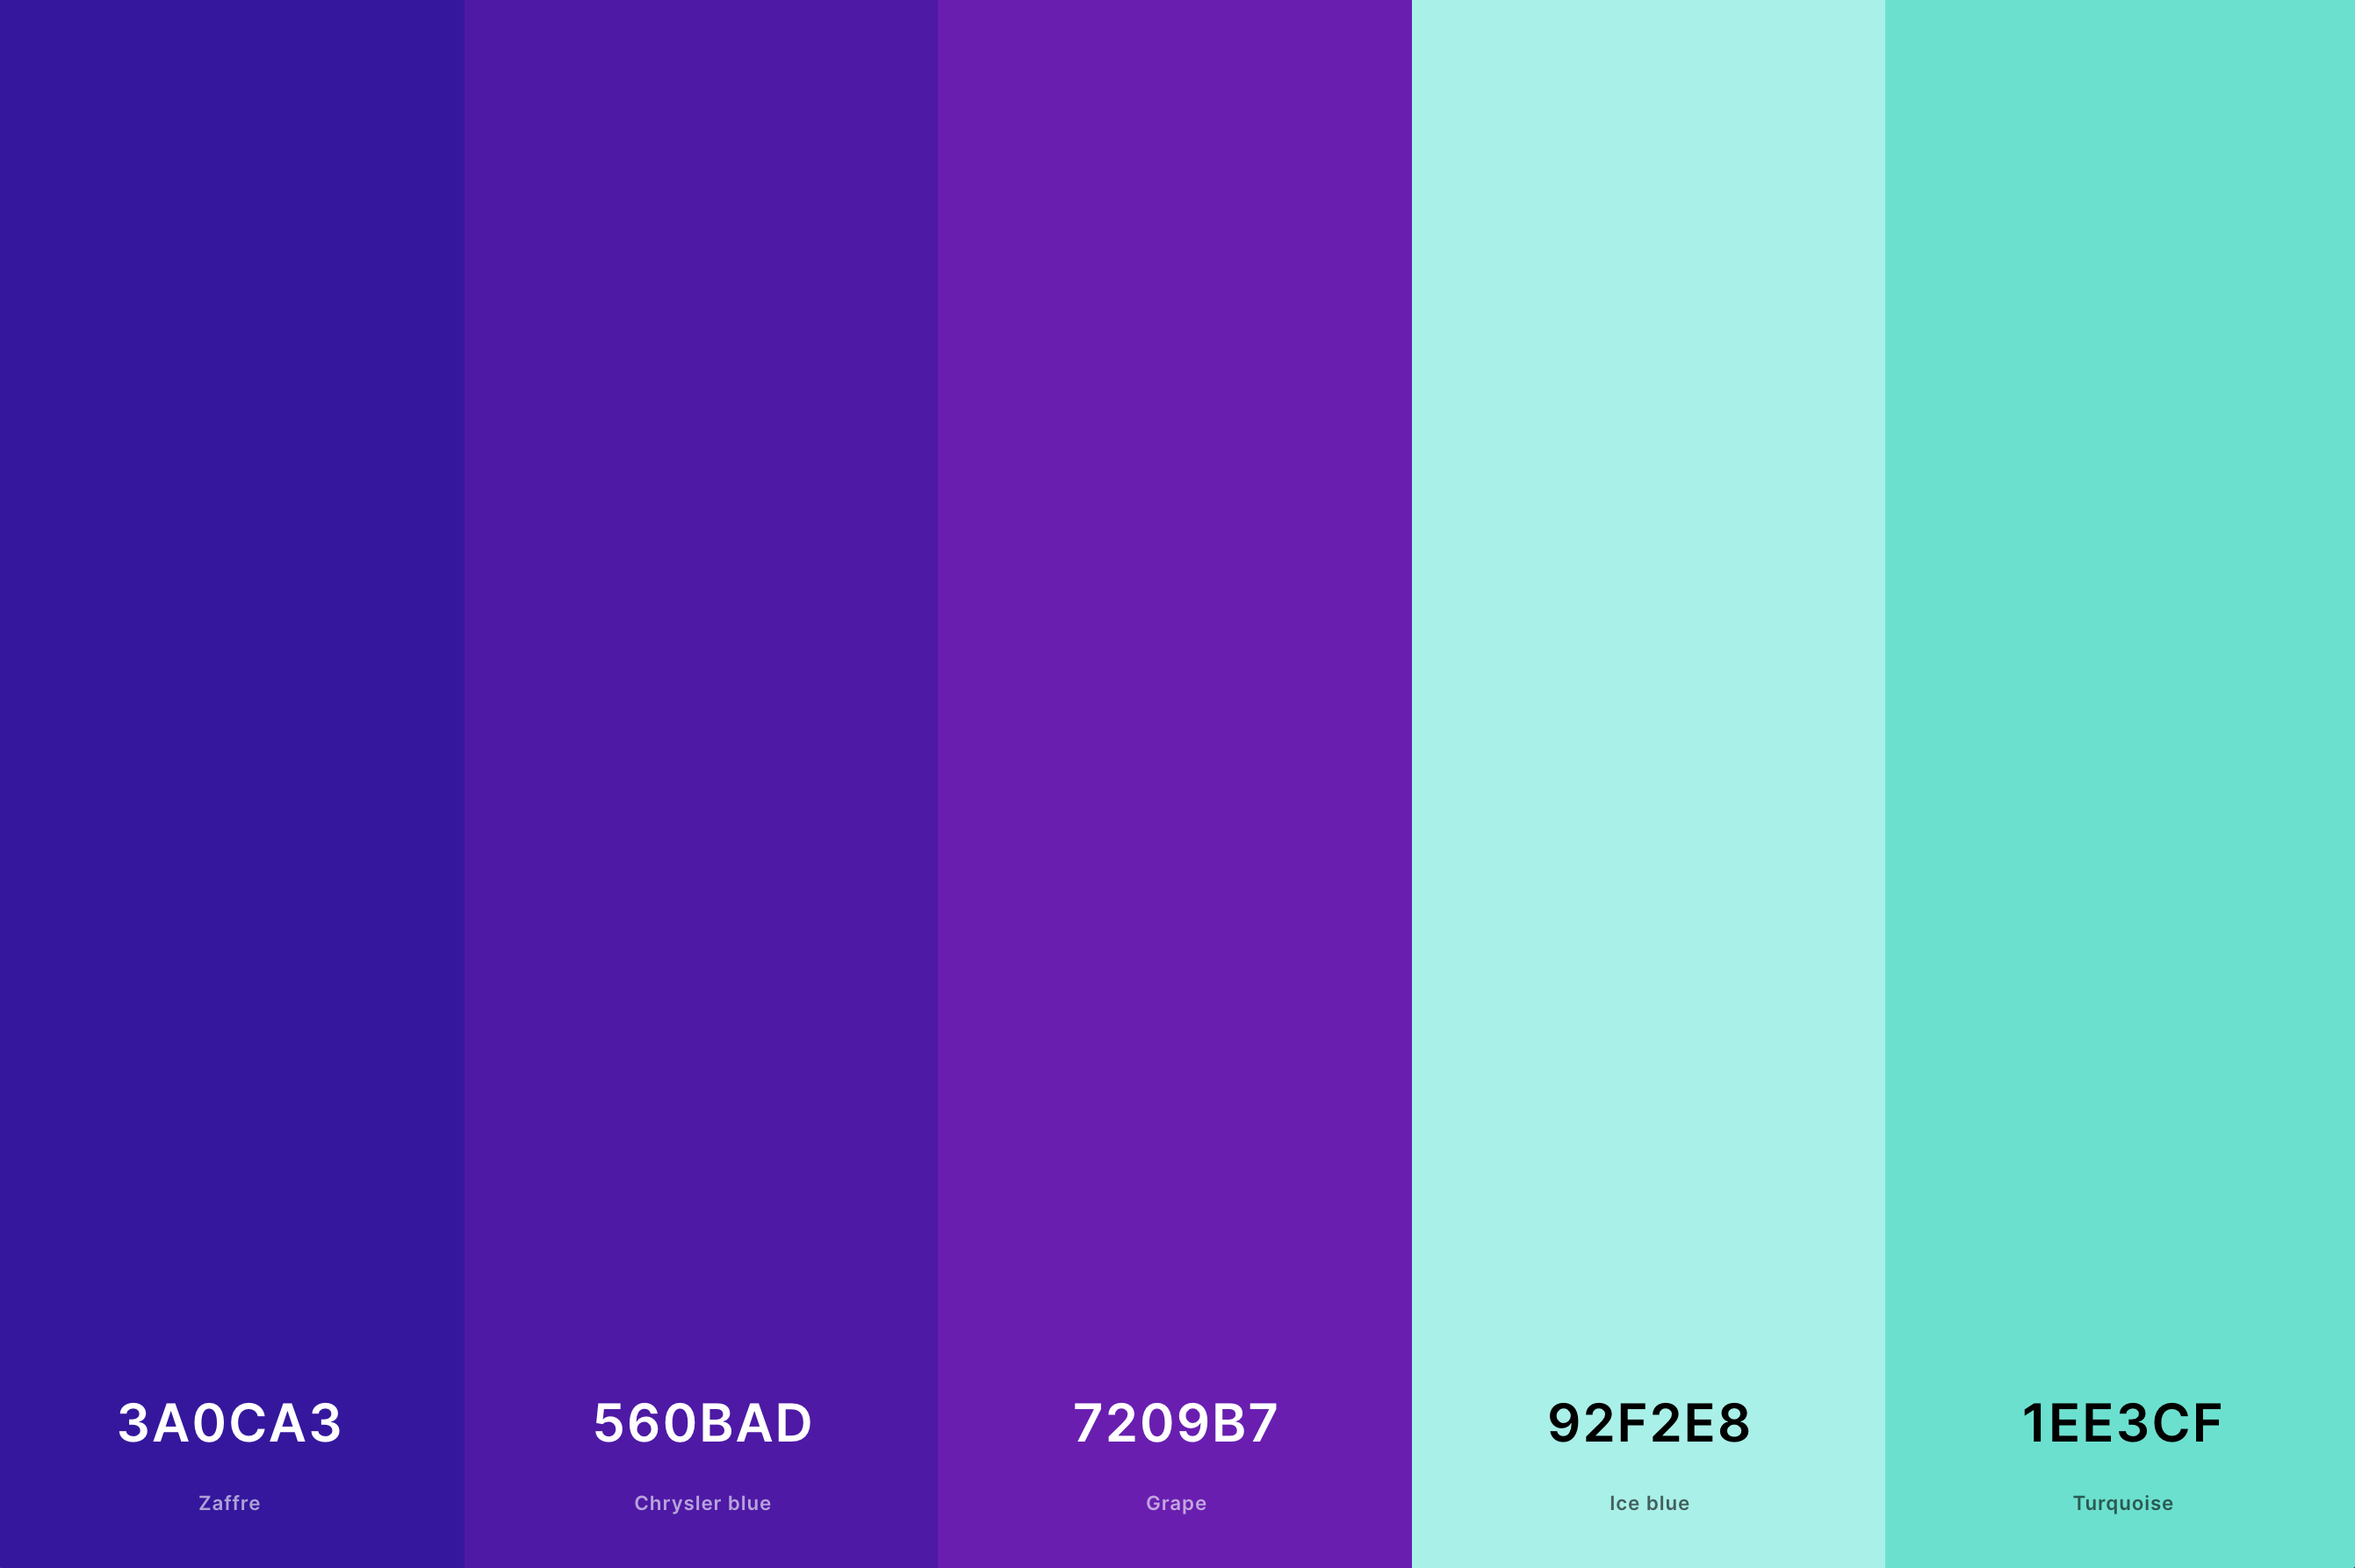 27. Purple And Turquoise Color Palette Color Palette with Zaffre (Hex #3A0CA3) + Chrysler Blue (Hex #560BAD) + Grape (Hex #7209B7) + Ice Blue (Hex #92F2E8) + Turquoise (Hex #1EE3CF) Color Palette with Hex Codes